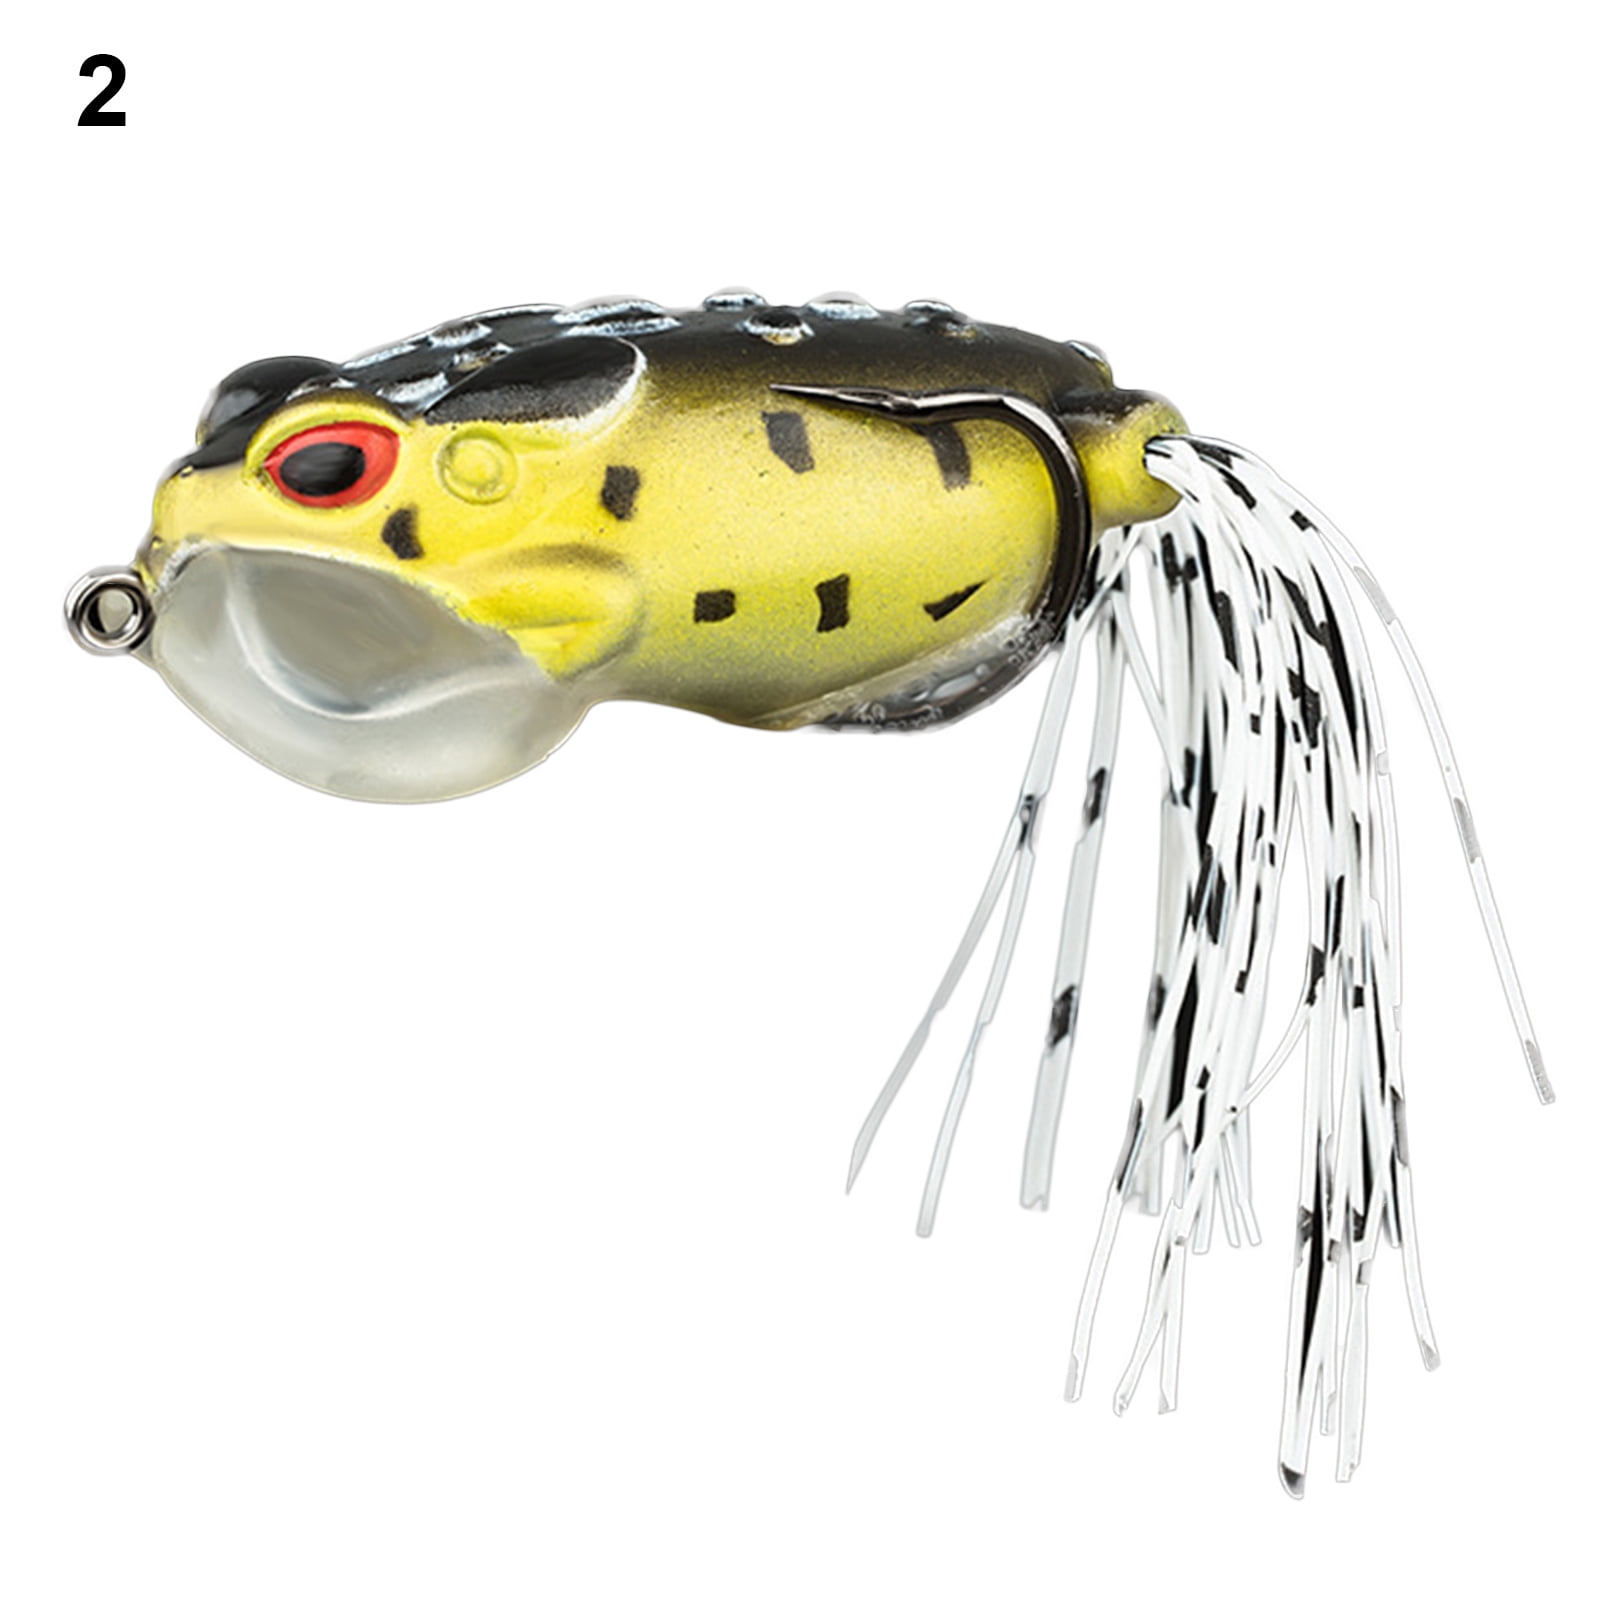  Topwater Frog Lures  Frog Fishing Lures for Bass Topwater -  Realistic Fake Soft Frog Fishing Lures with Double Hooks Bass Fishing Lures  Sequins Betterday : Sports & Outdoors